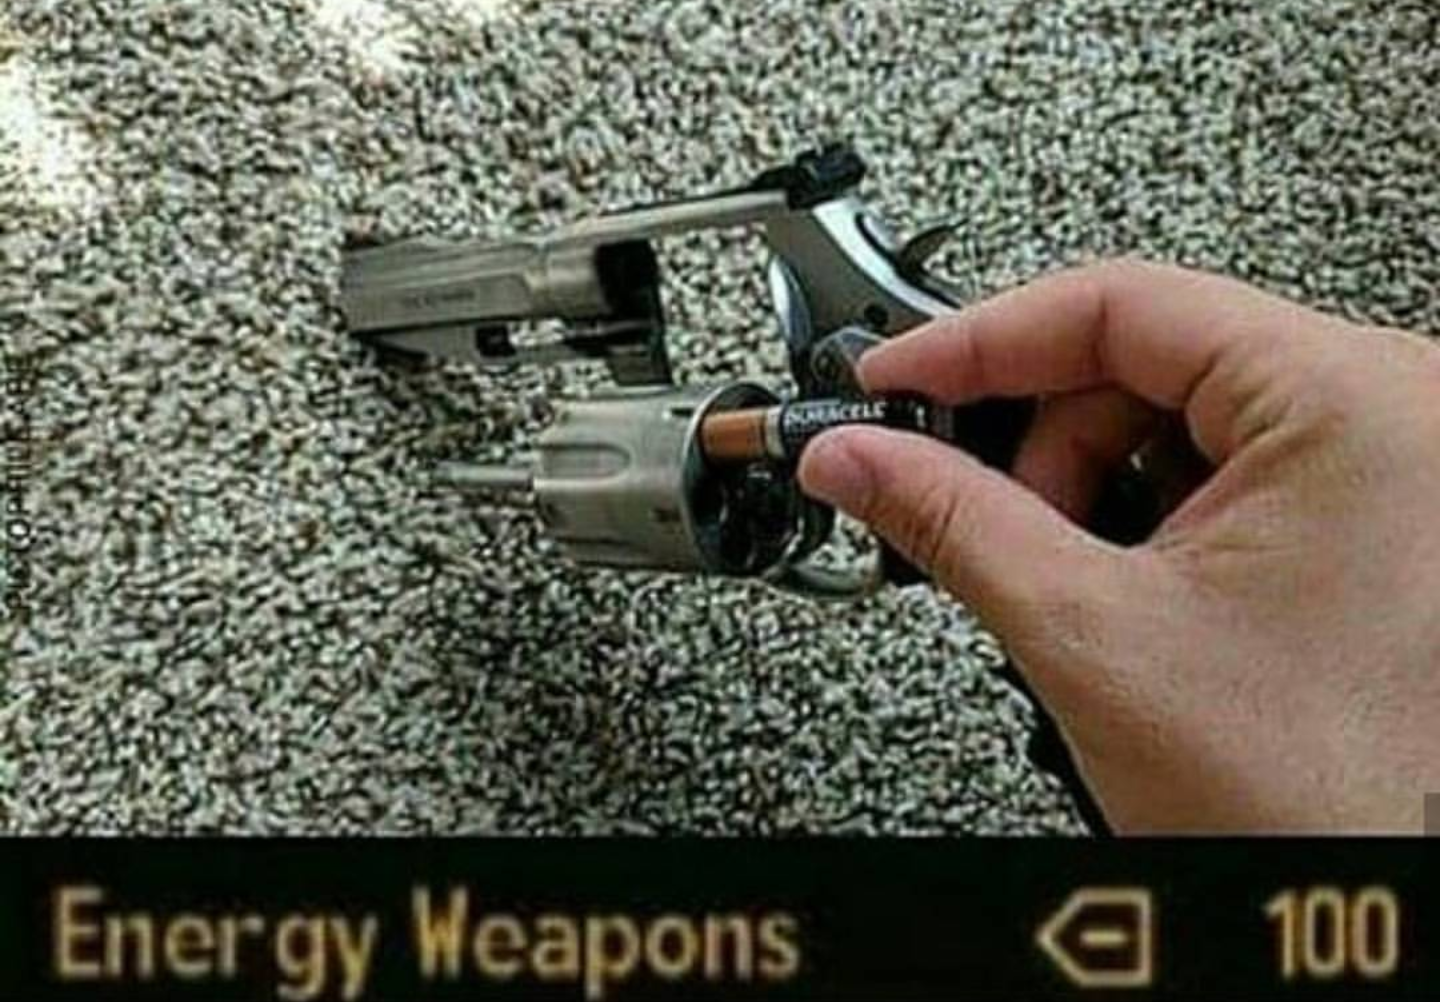 fallout new vegas memes - Energy Weapons @ 100